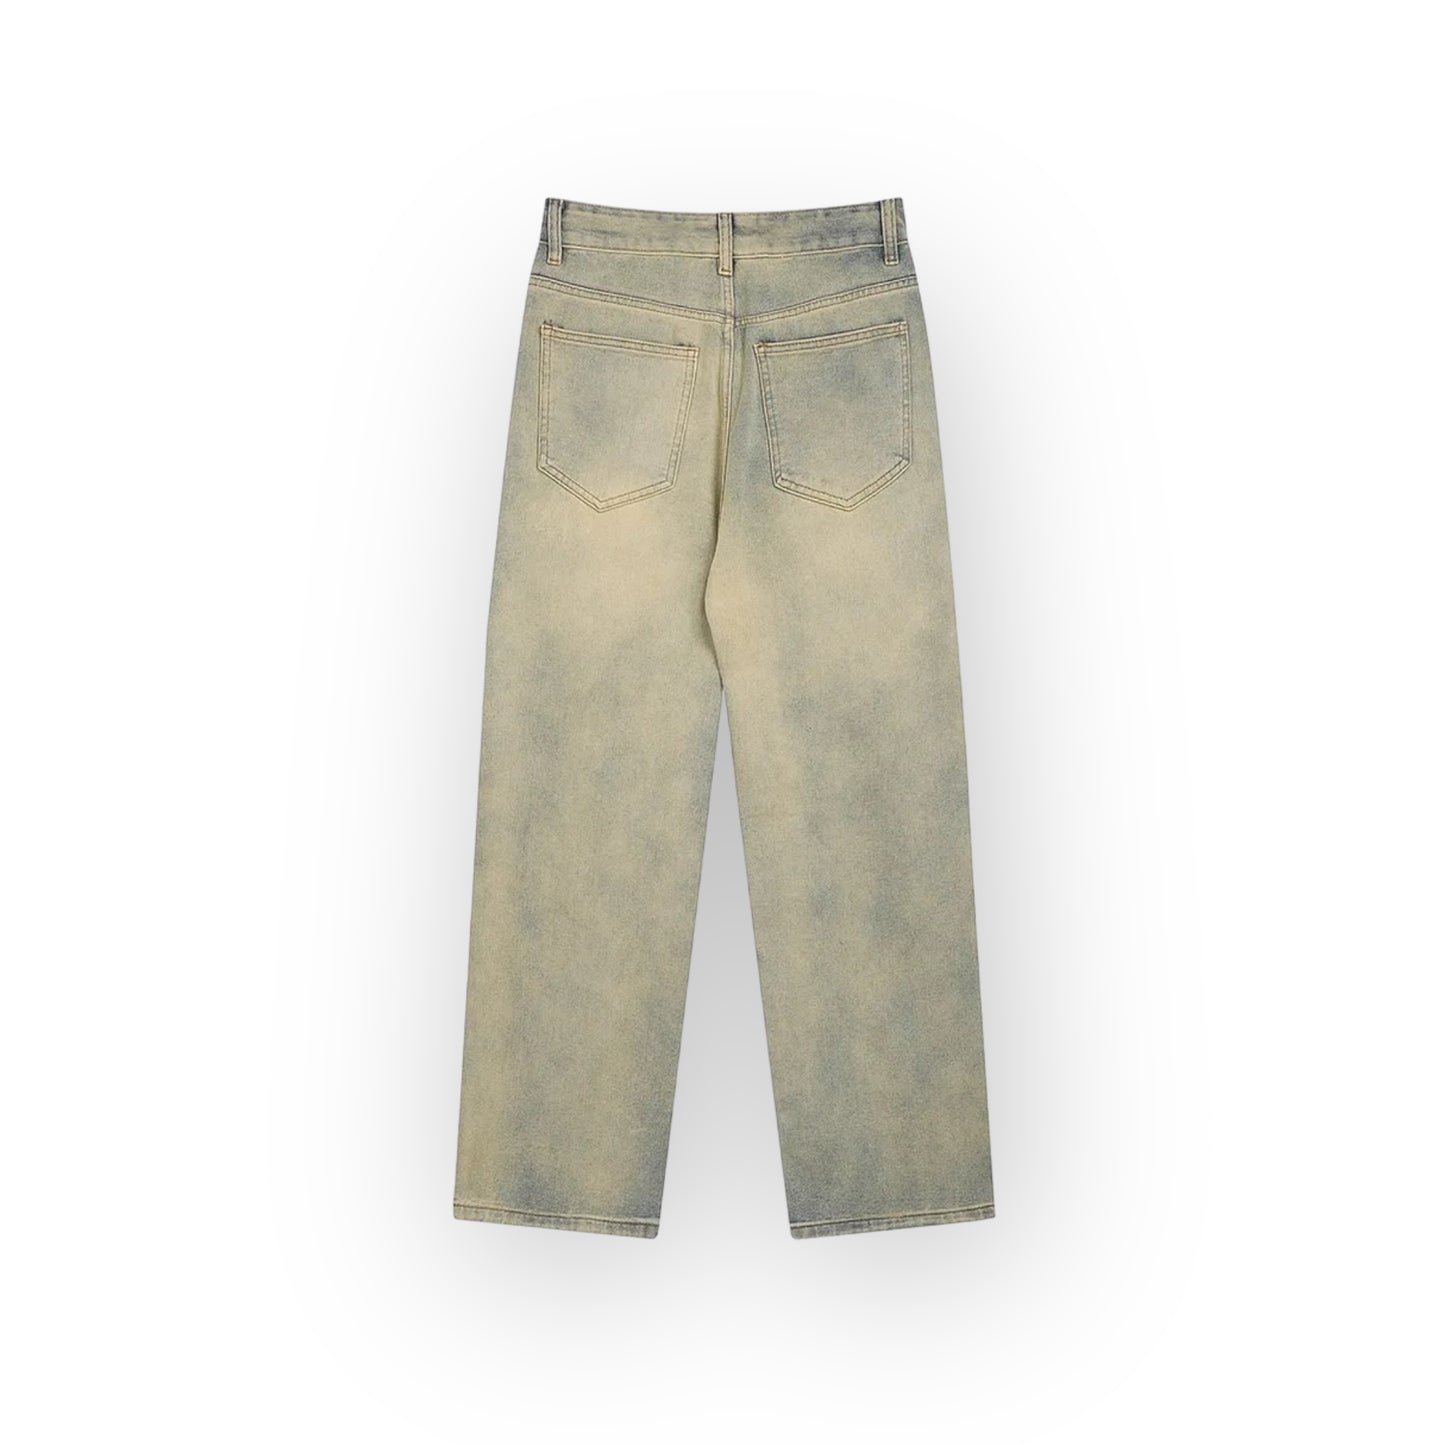 Aolamegs Vintage Washed Unisex Jeans